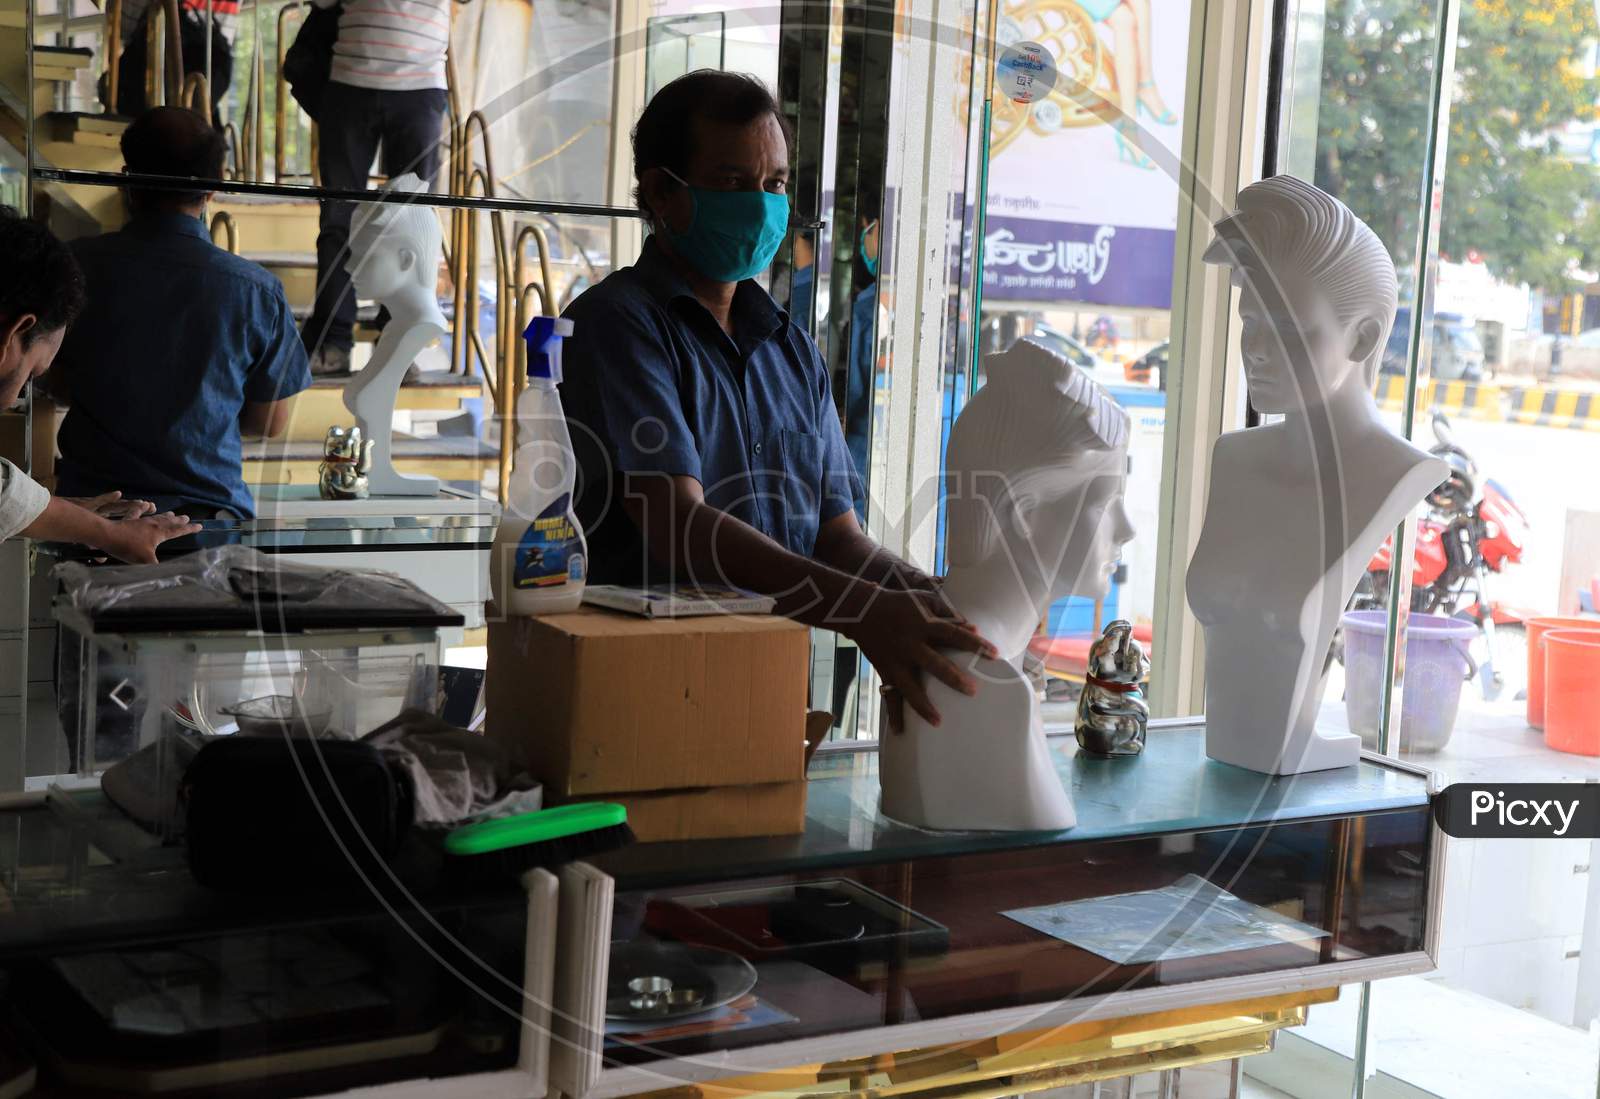 A Worker Cleans The Shop  After  Authorities Allowed Shopkeepers To Open Their Establishments With Certain Restrictions During Coronavirus or COVID-19 Pandemic in Prayagraj, May 20,2020